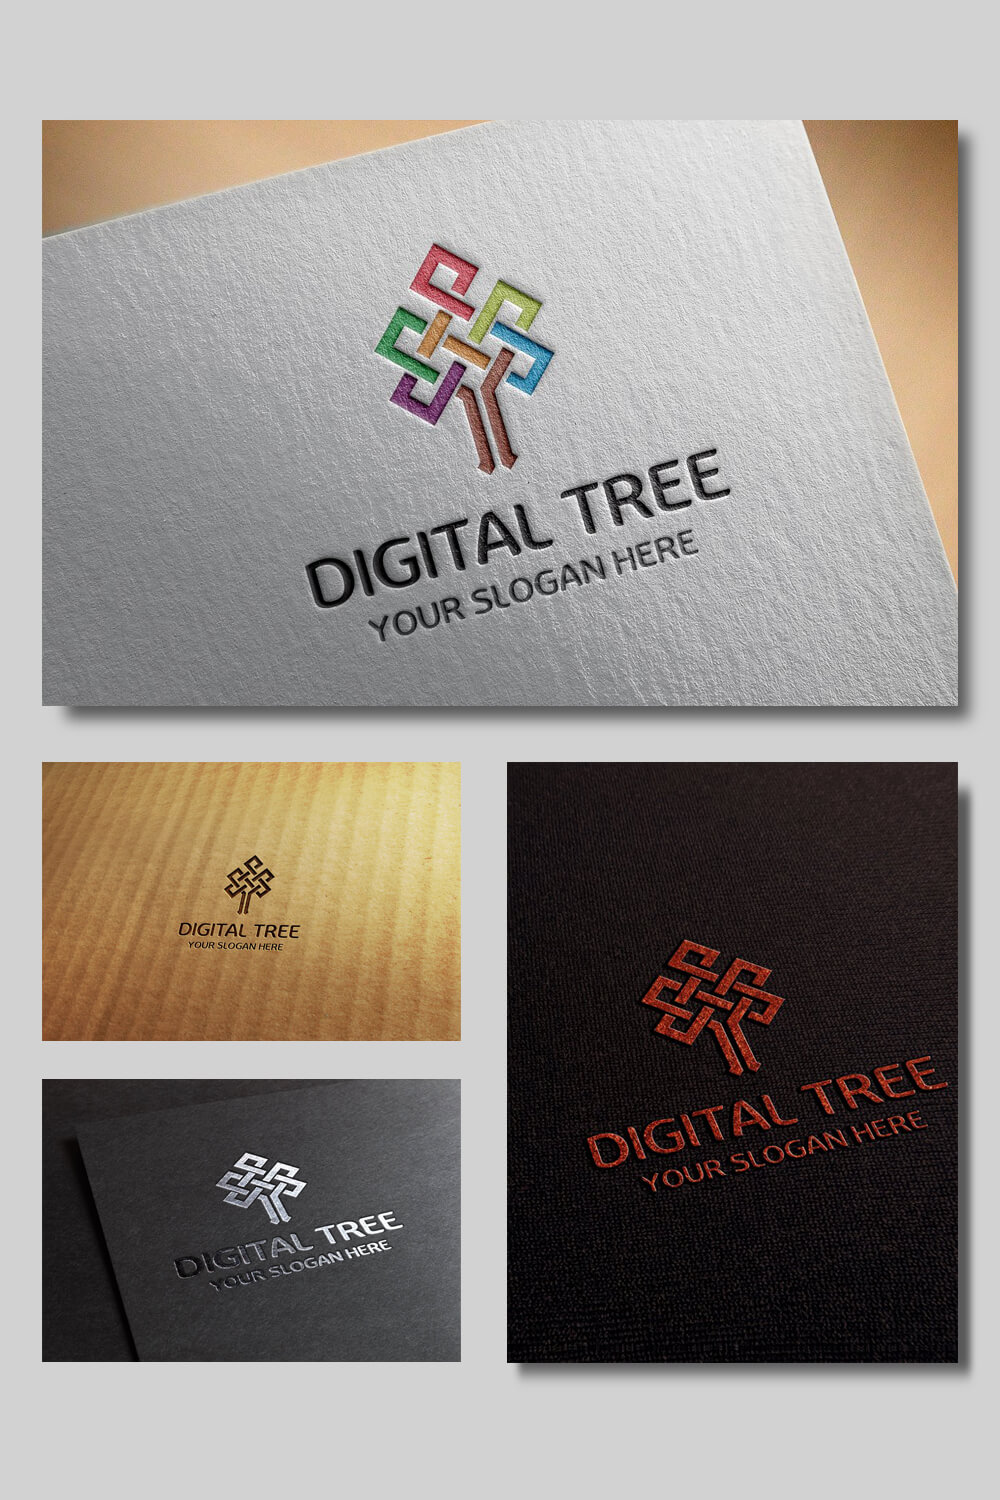 Four variants of the digital tree logo on different backgrounds.